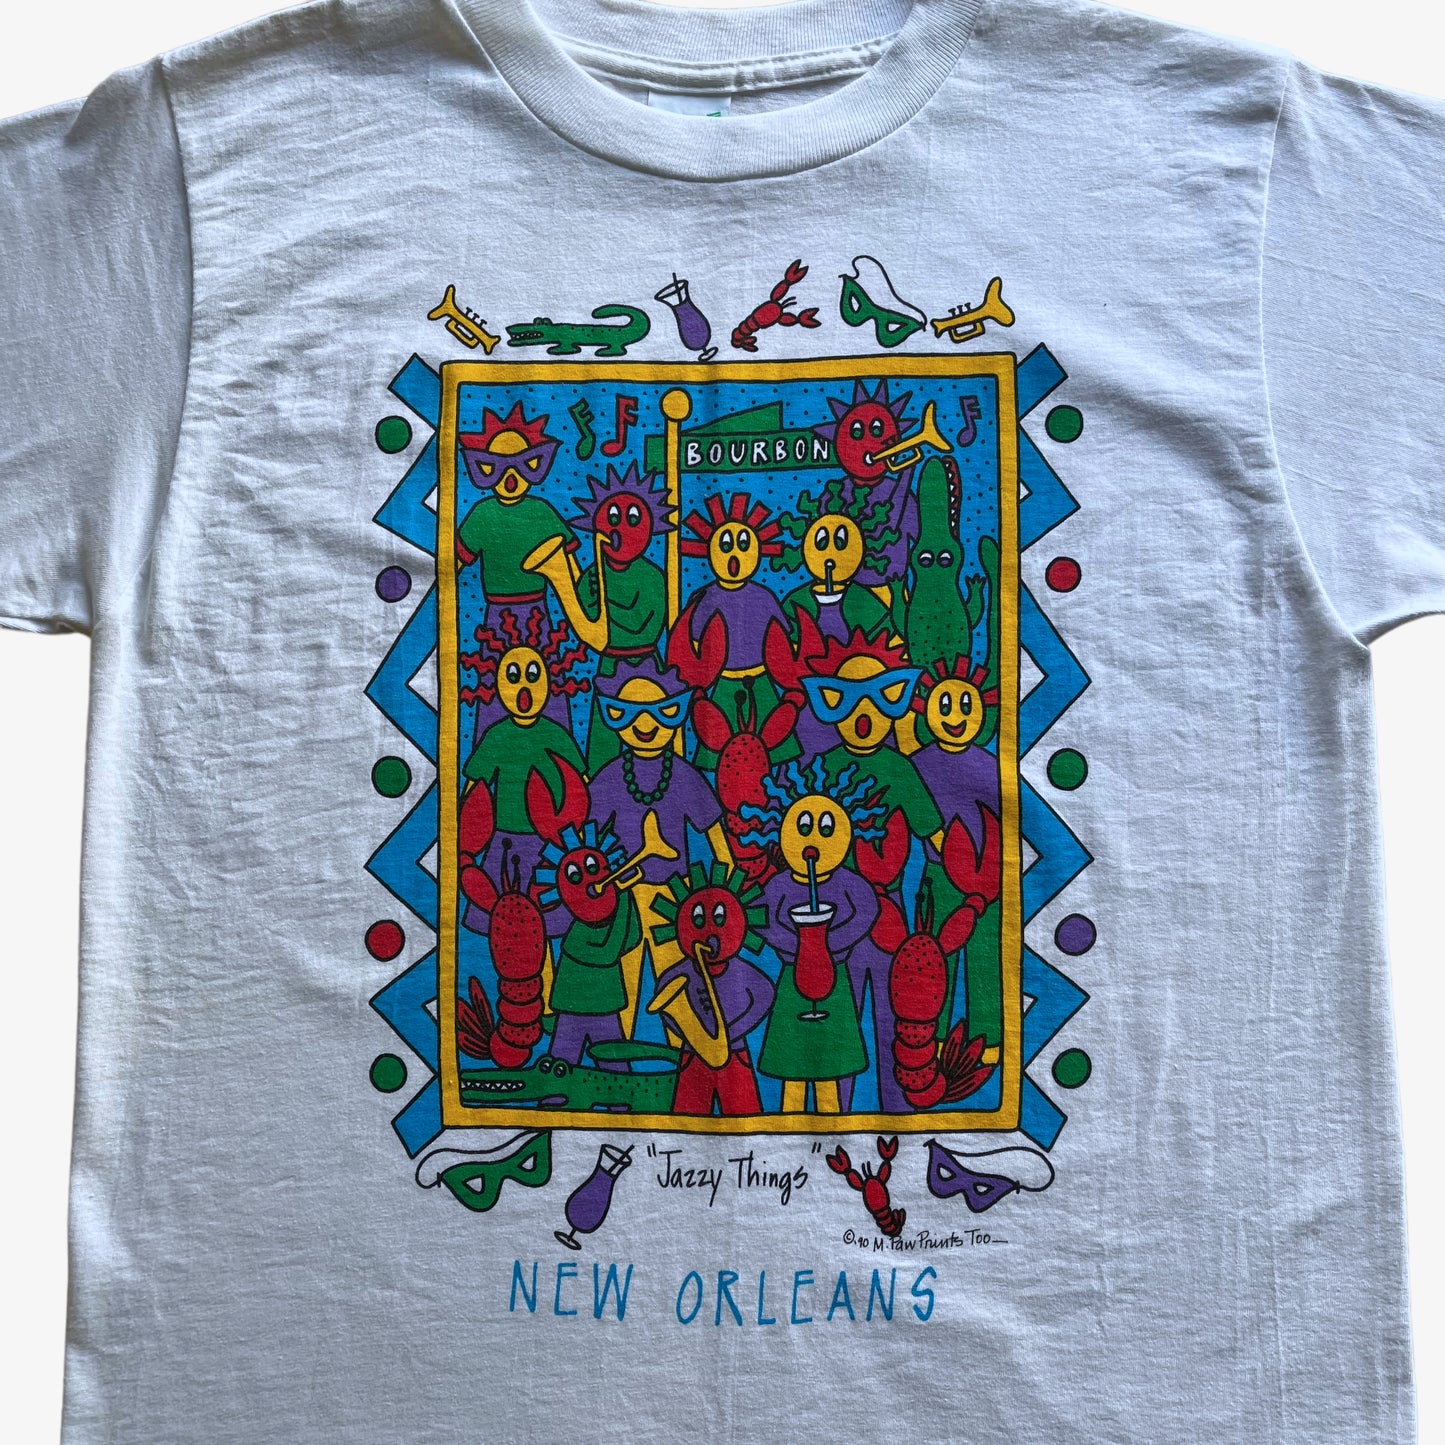 New Orleans Jazzy Things Single Stitch Top